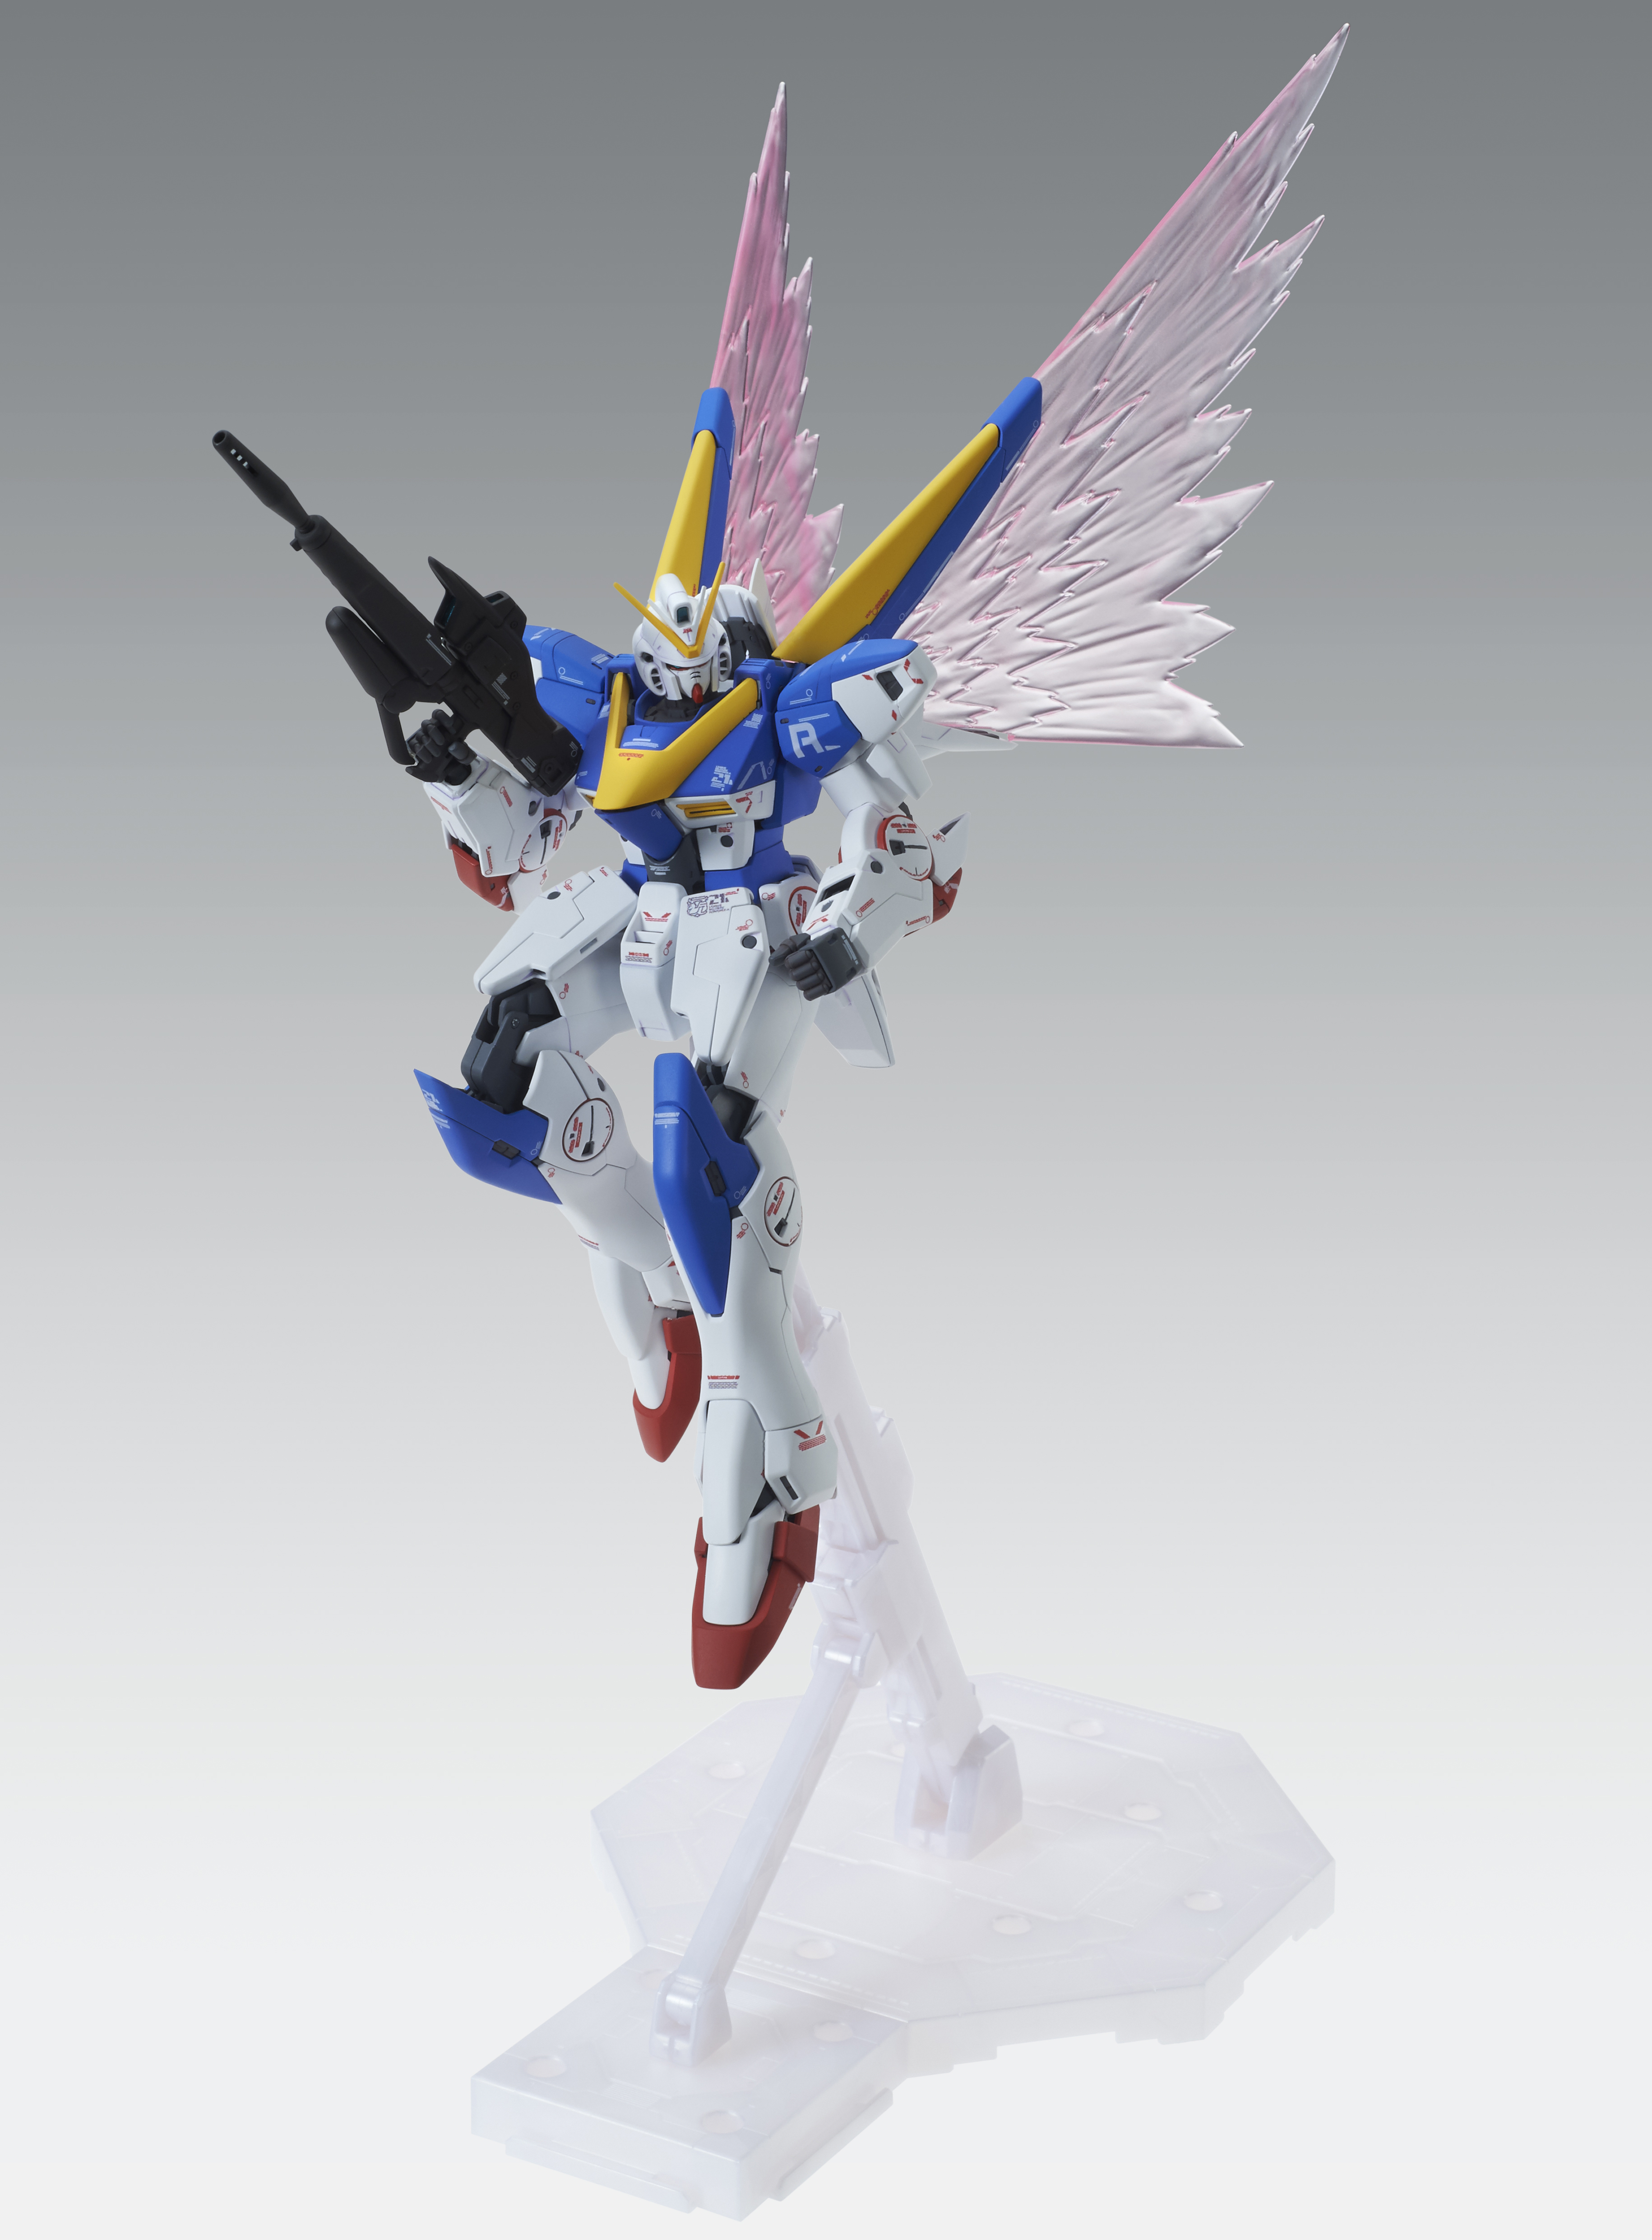 Mg 1 100 Expansion Effect Unit Wings Of Light For Victory Two Gundam Ver Ka Sep 2020 Delivery Gundam Premium Bandai Usa Online Store For Action Figures Model Kits Toys And More